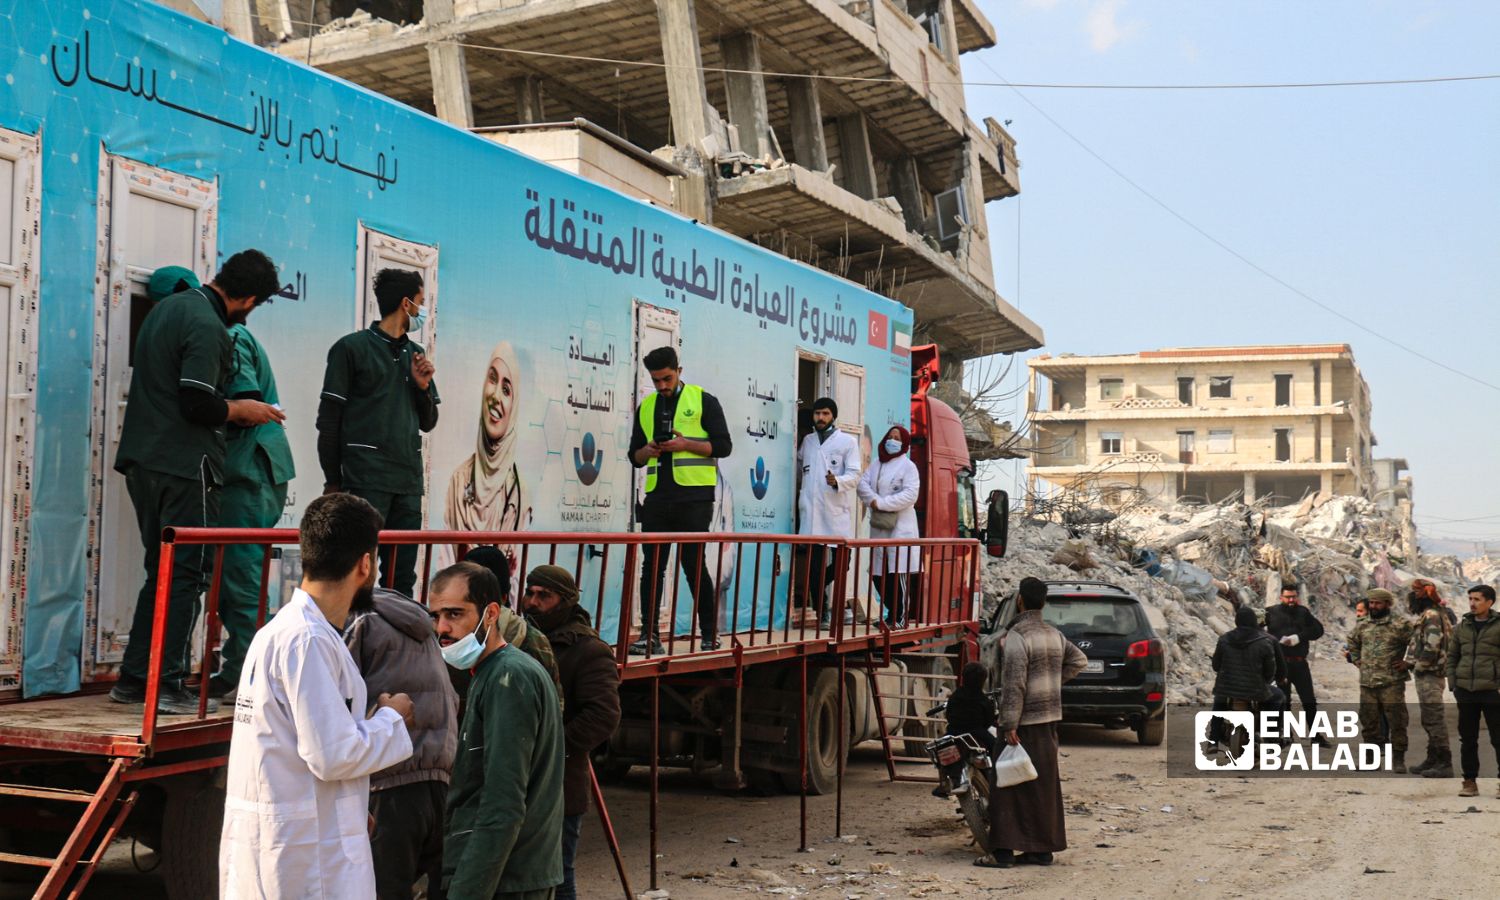 A mobile clinic in Jindires town in the northern countryside of Aleppo, providing medical services to the people affected by the earthquake that struck southern Turkey and separate areas in Syria - February 13, 2023 (Enab Baladi/Dayan Junpaz)